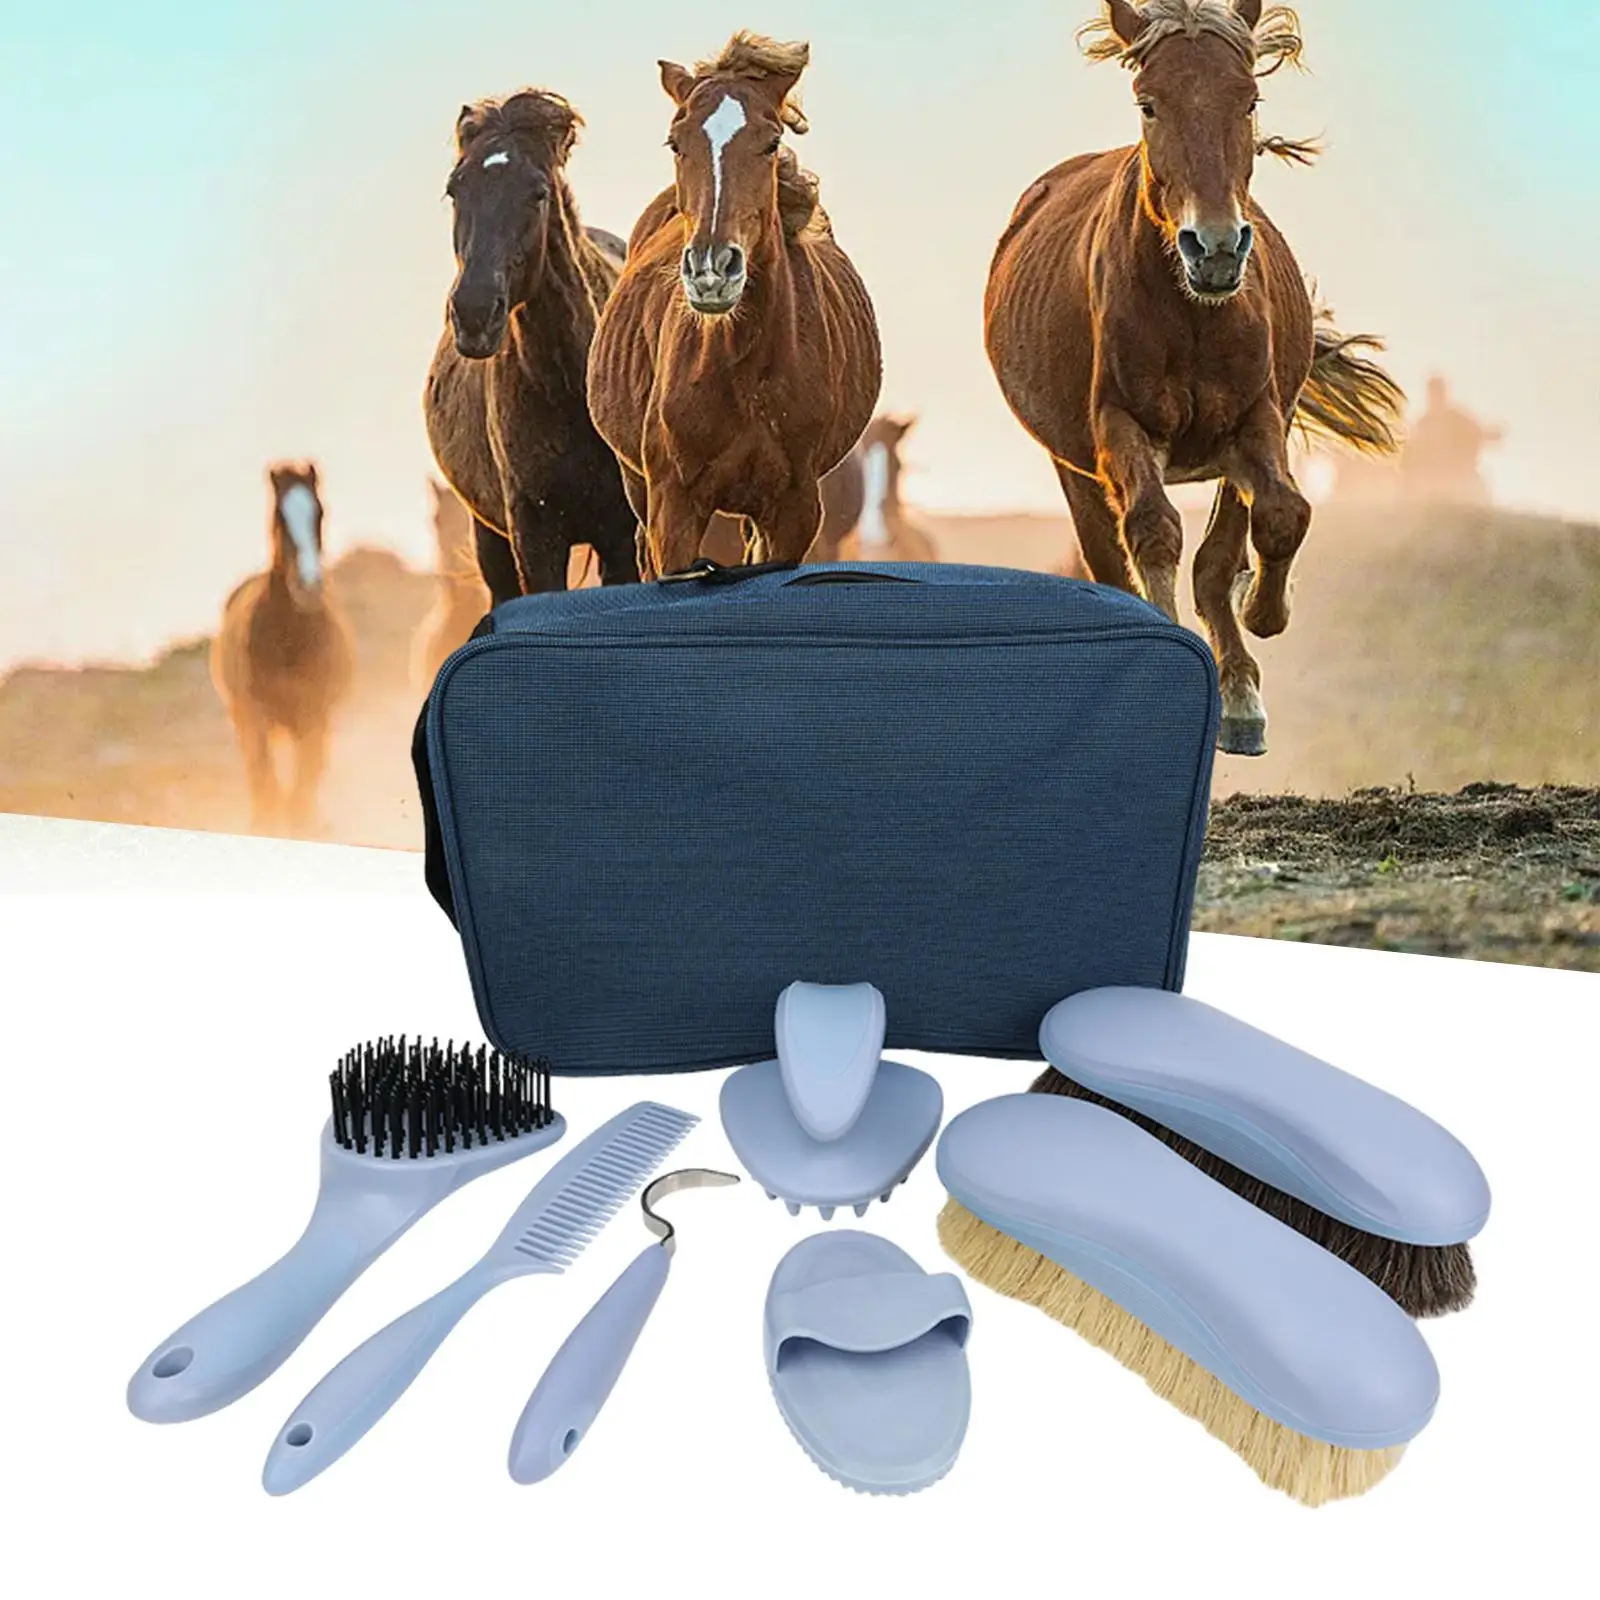 8x Horse Grooming Care Kit Horse Bathing Supplies Riding Equipment Maintenance Set Horse Cleaning Brushes for Beginners